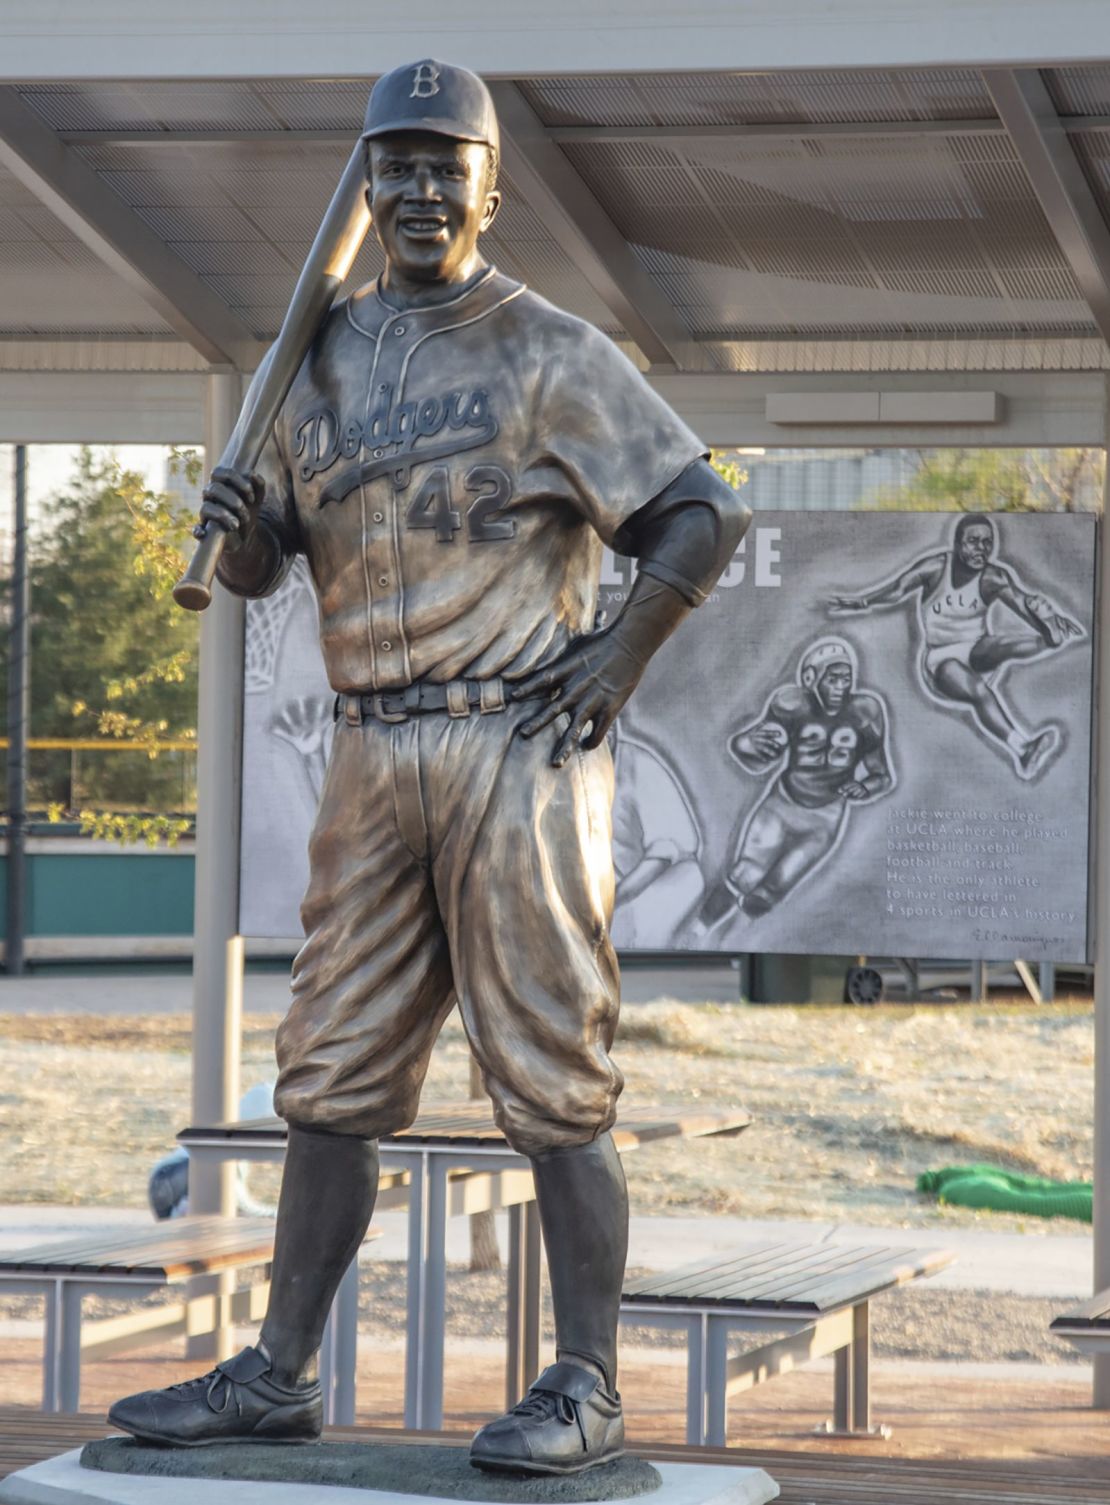 The bronze statue of baseball legend Jackie Robinson before it was cut down and stolen from a Wichita, Kansas park.